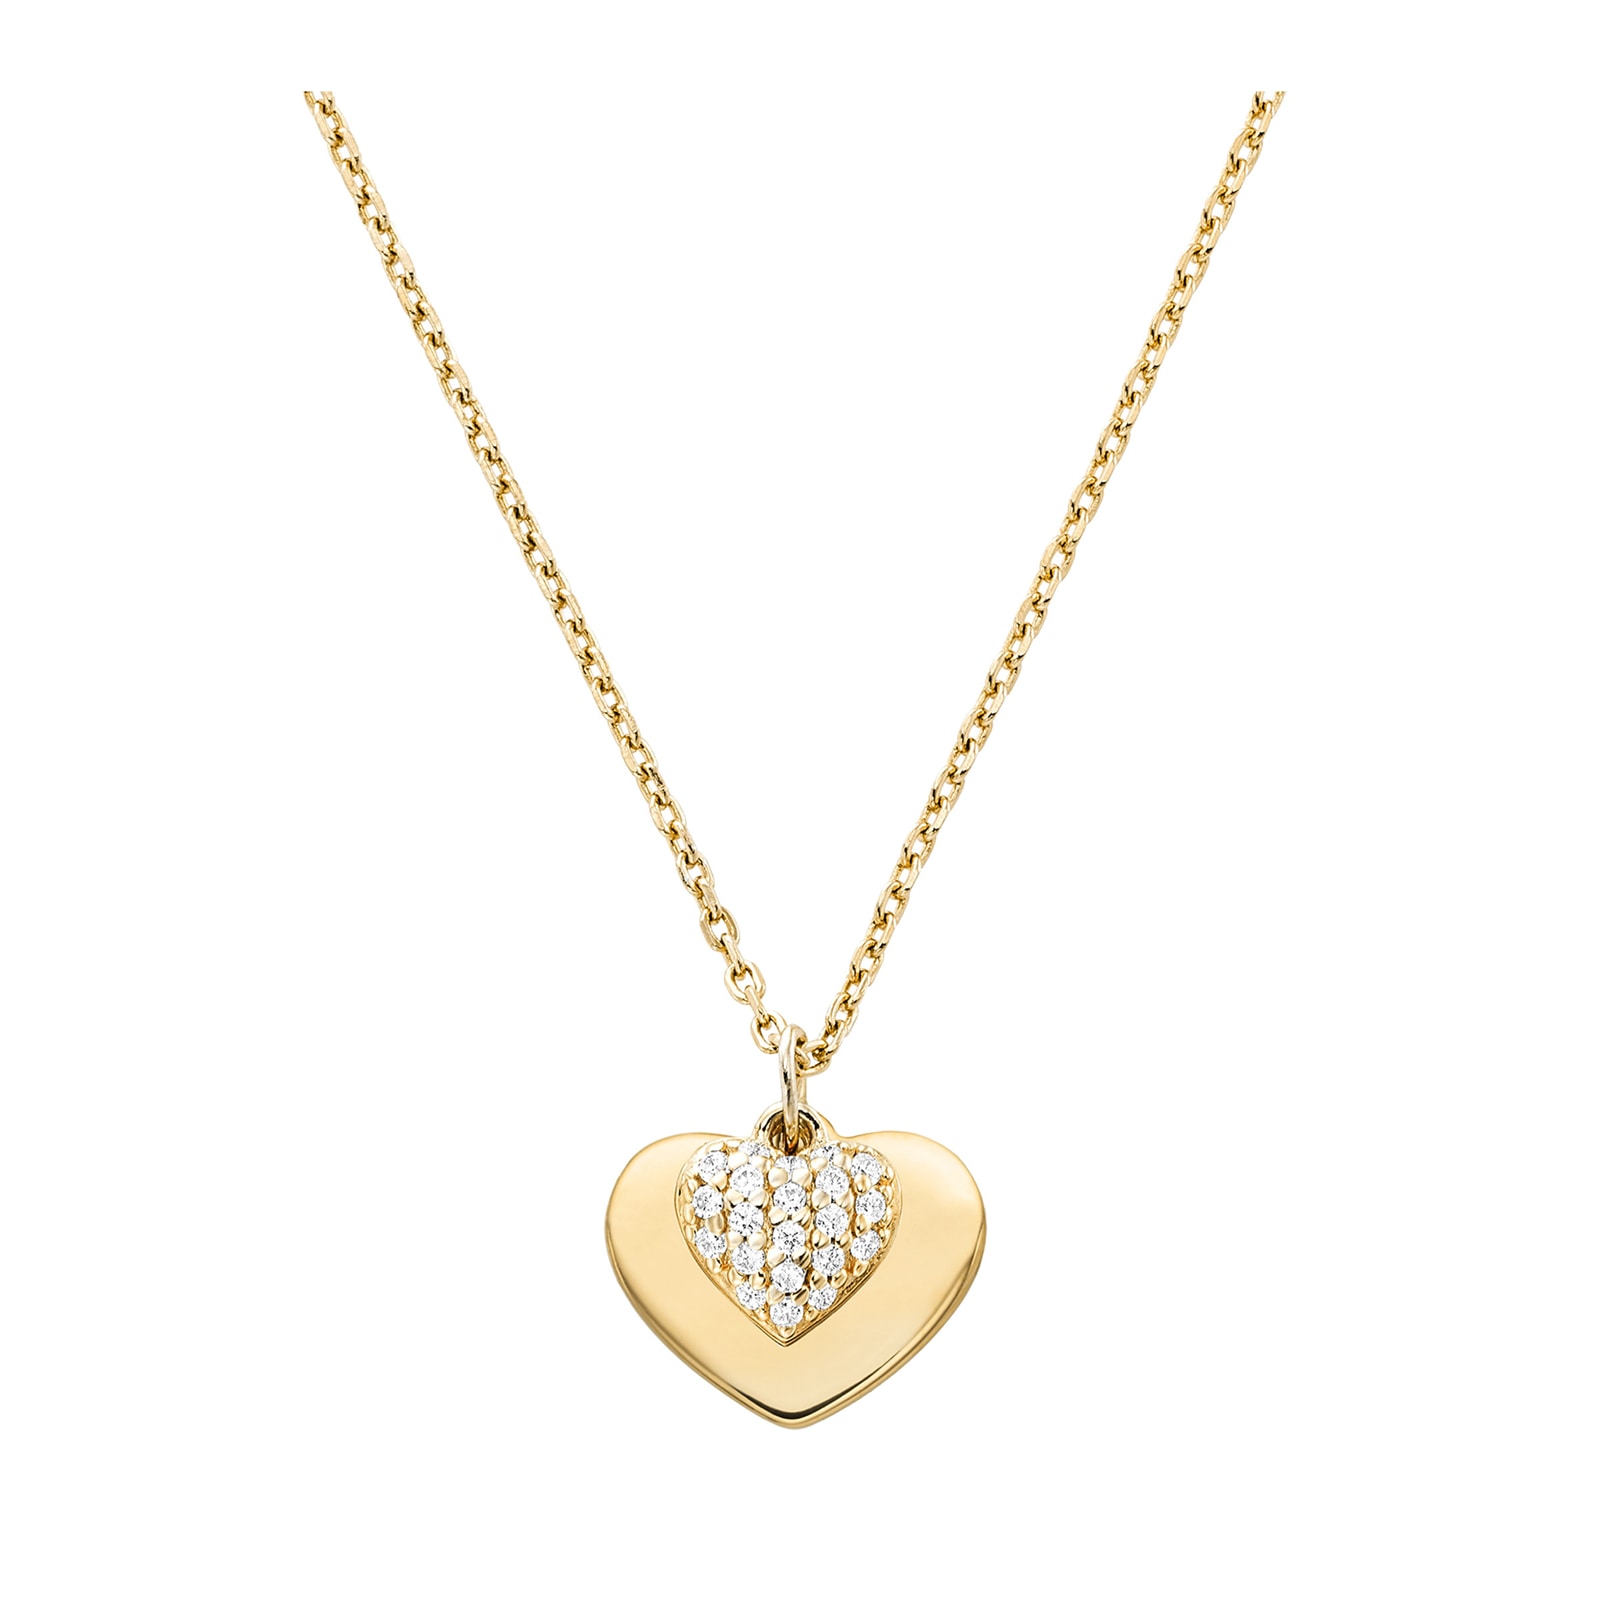 Precious Metal-Plated Sterling Silver Pavé Halo Necklace | Michael Kors